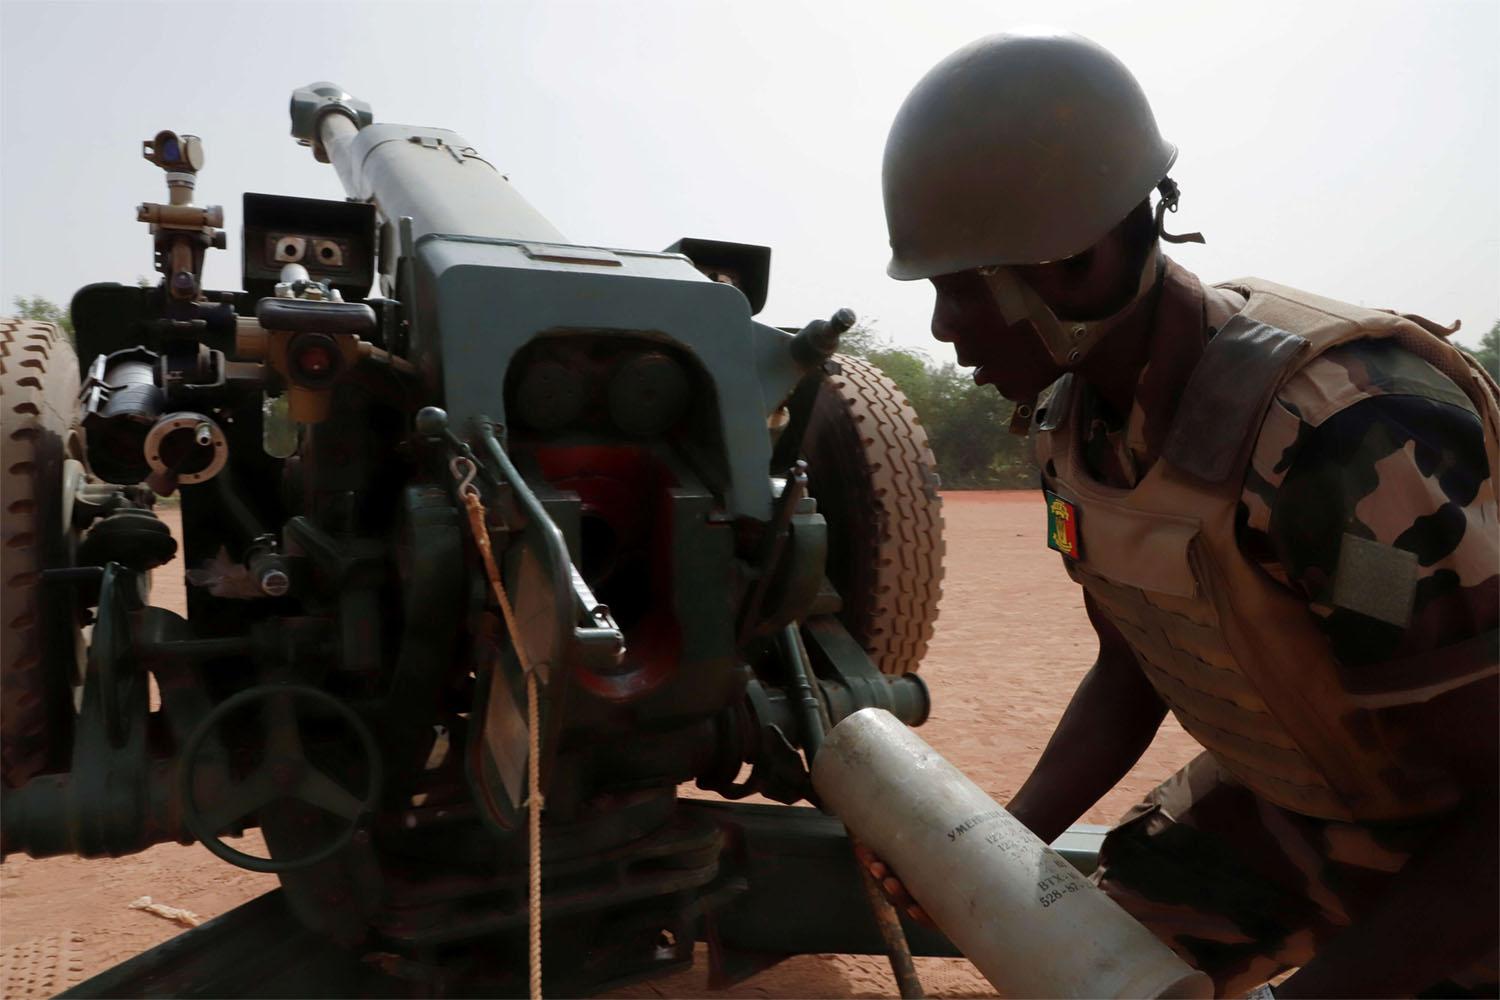 The extremists have spent the last decade attacking the Malian military and a UN peacekeeping force trying to stabilize the country.